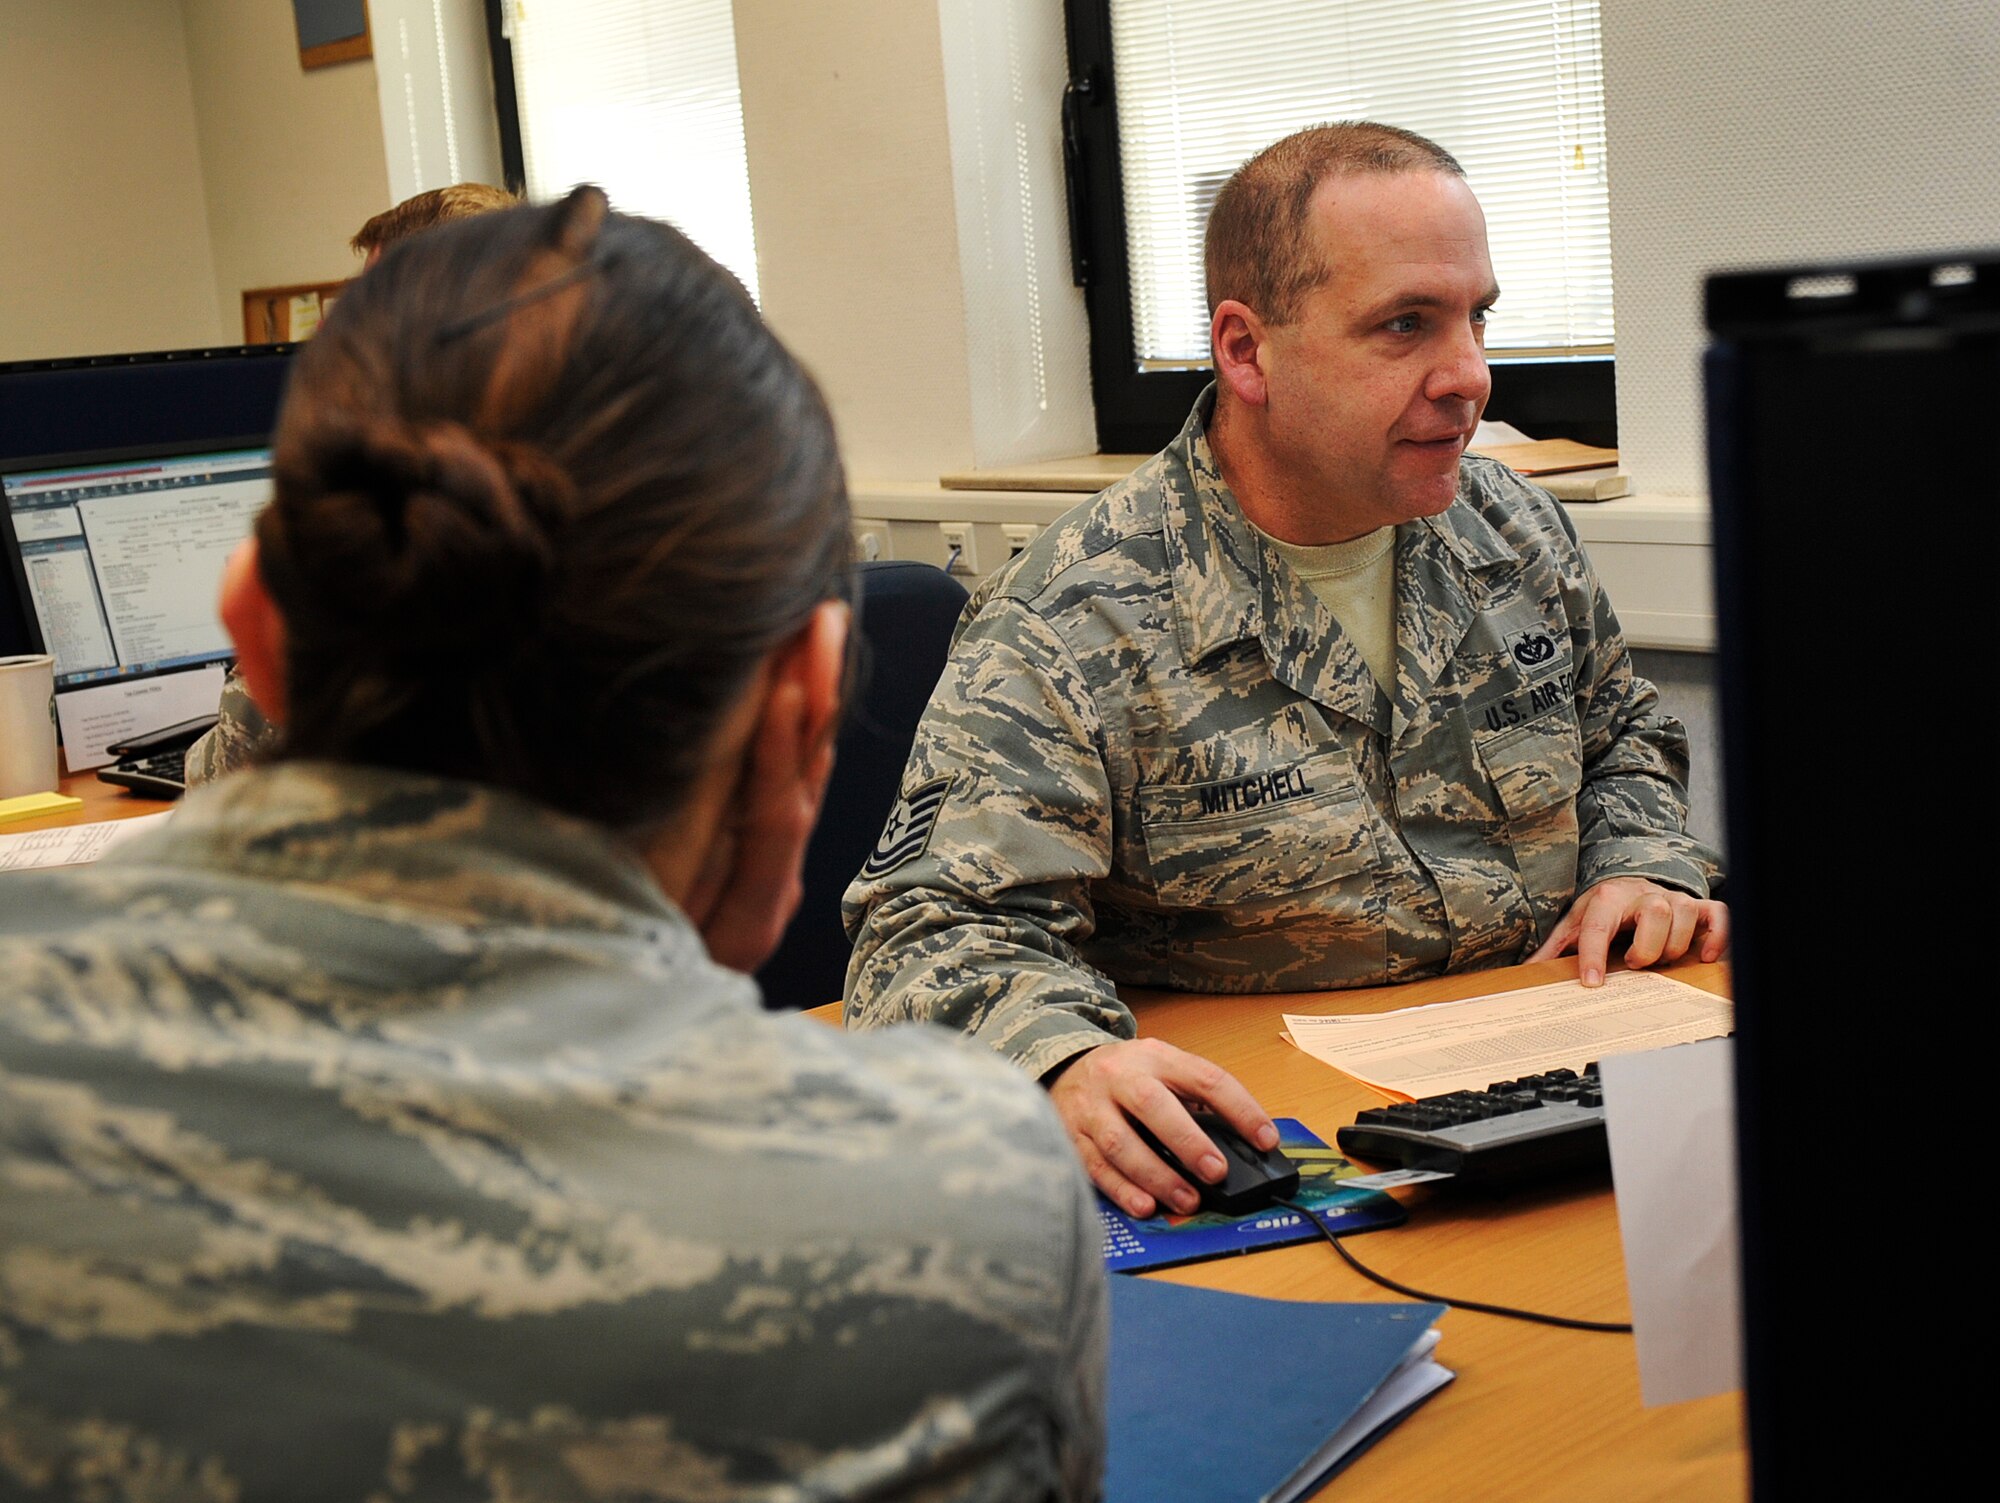 Tech. Sgt. David Mitchell, 786th Civil Engineer Squadron payments and construction equipment NCO in charge, assists Senior Airman Kathryn Patchoski, 569th U.S. Forces Police Squadron police services NCO, with her tax return at the tax center Feb. 18, 2016, at Ramstein Air Base, Germany. The tax center assisted in $2.1 million in refunds in 2014. (U.S. Air Force photo/Airman 1st Class Larissa Greatwood)